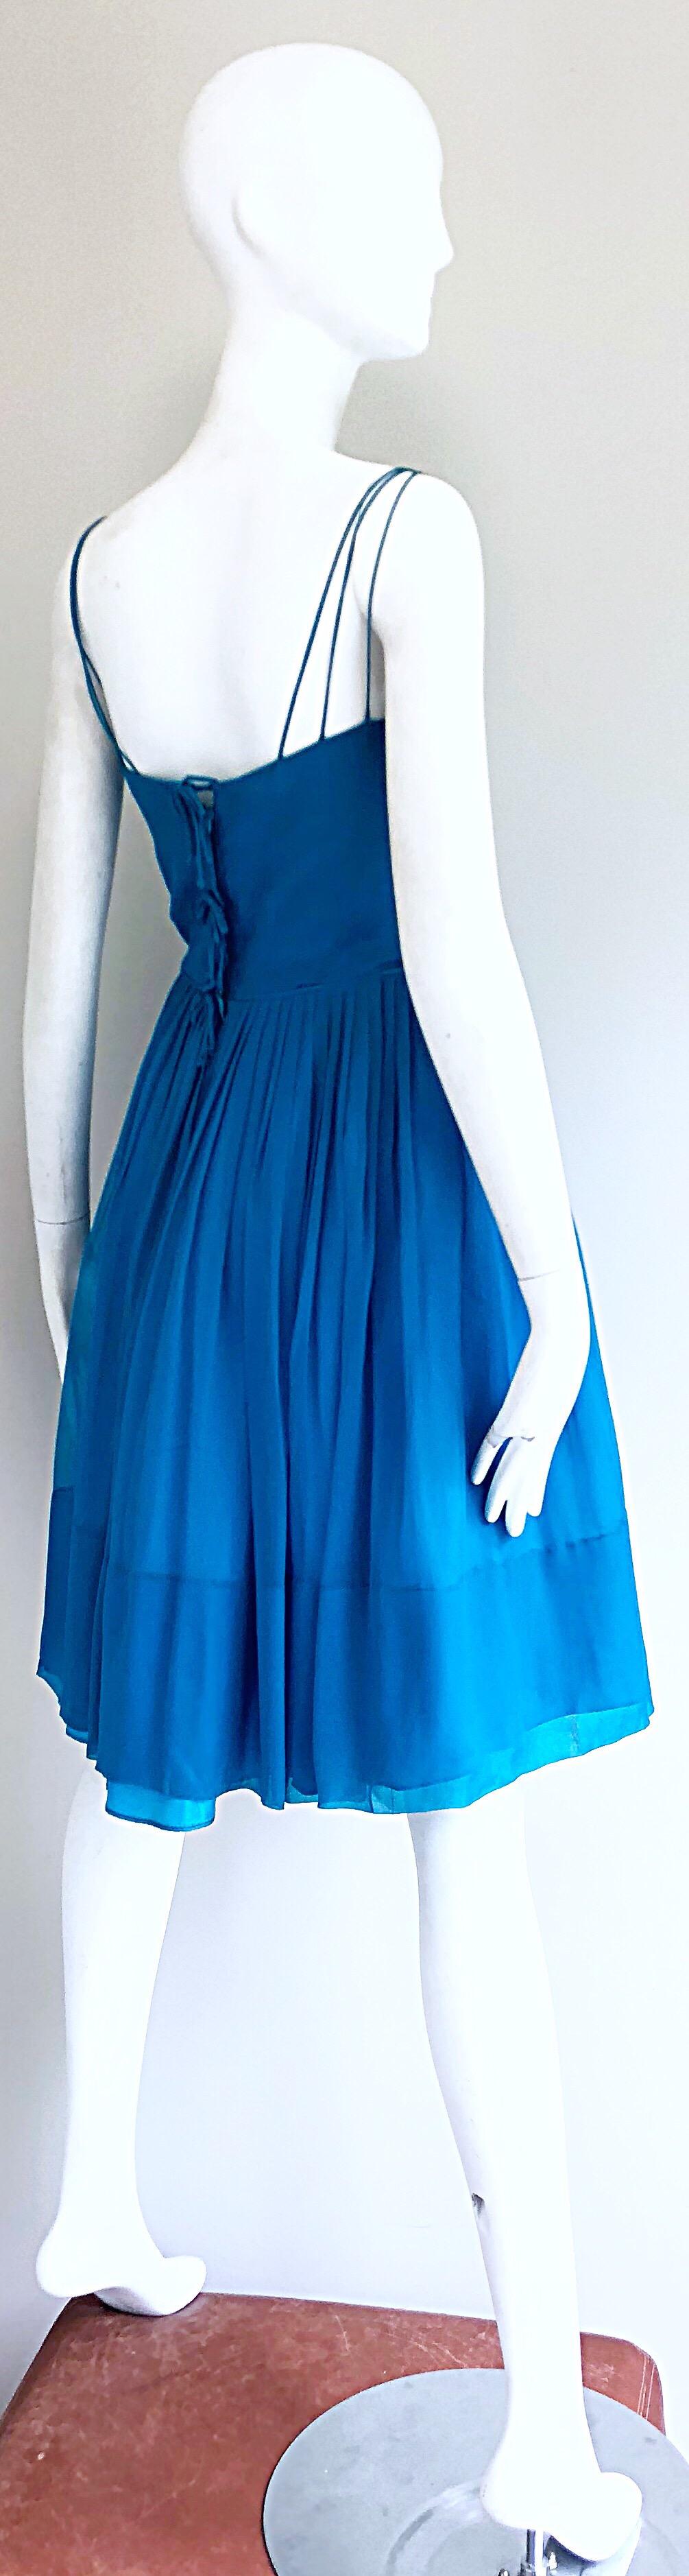 1950s Turquoise Blue Silk Chiffon Nude Illusion Fit n' Flare Vintage 50s Dress 4